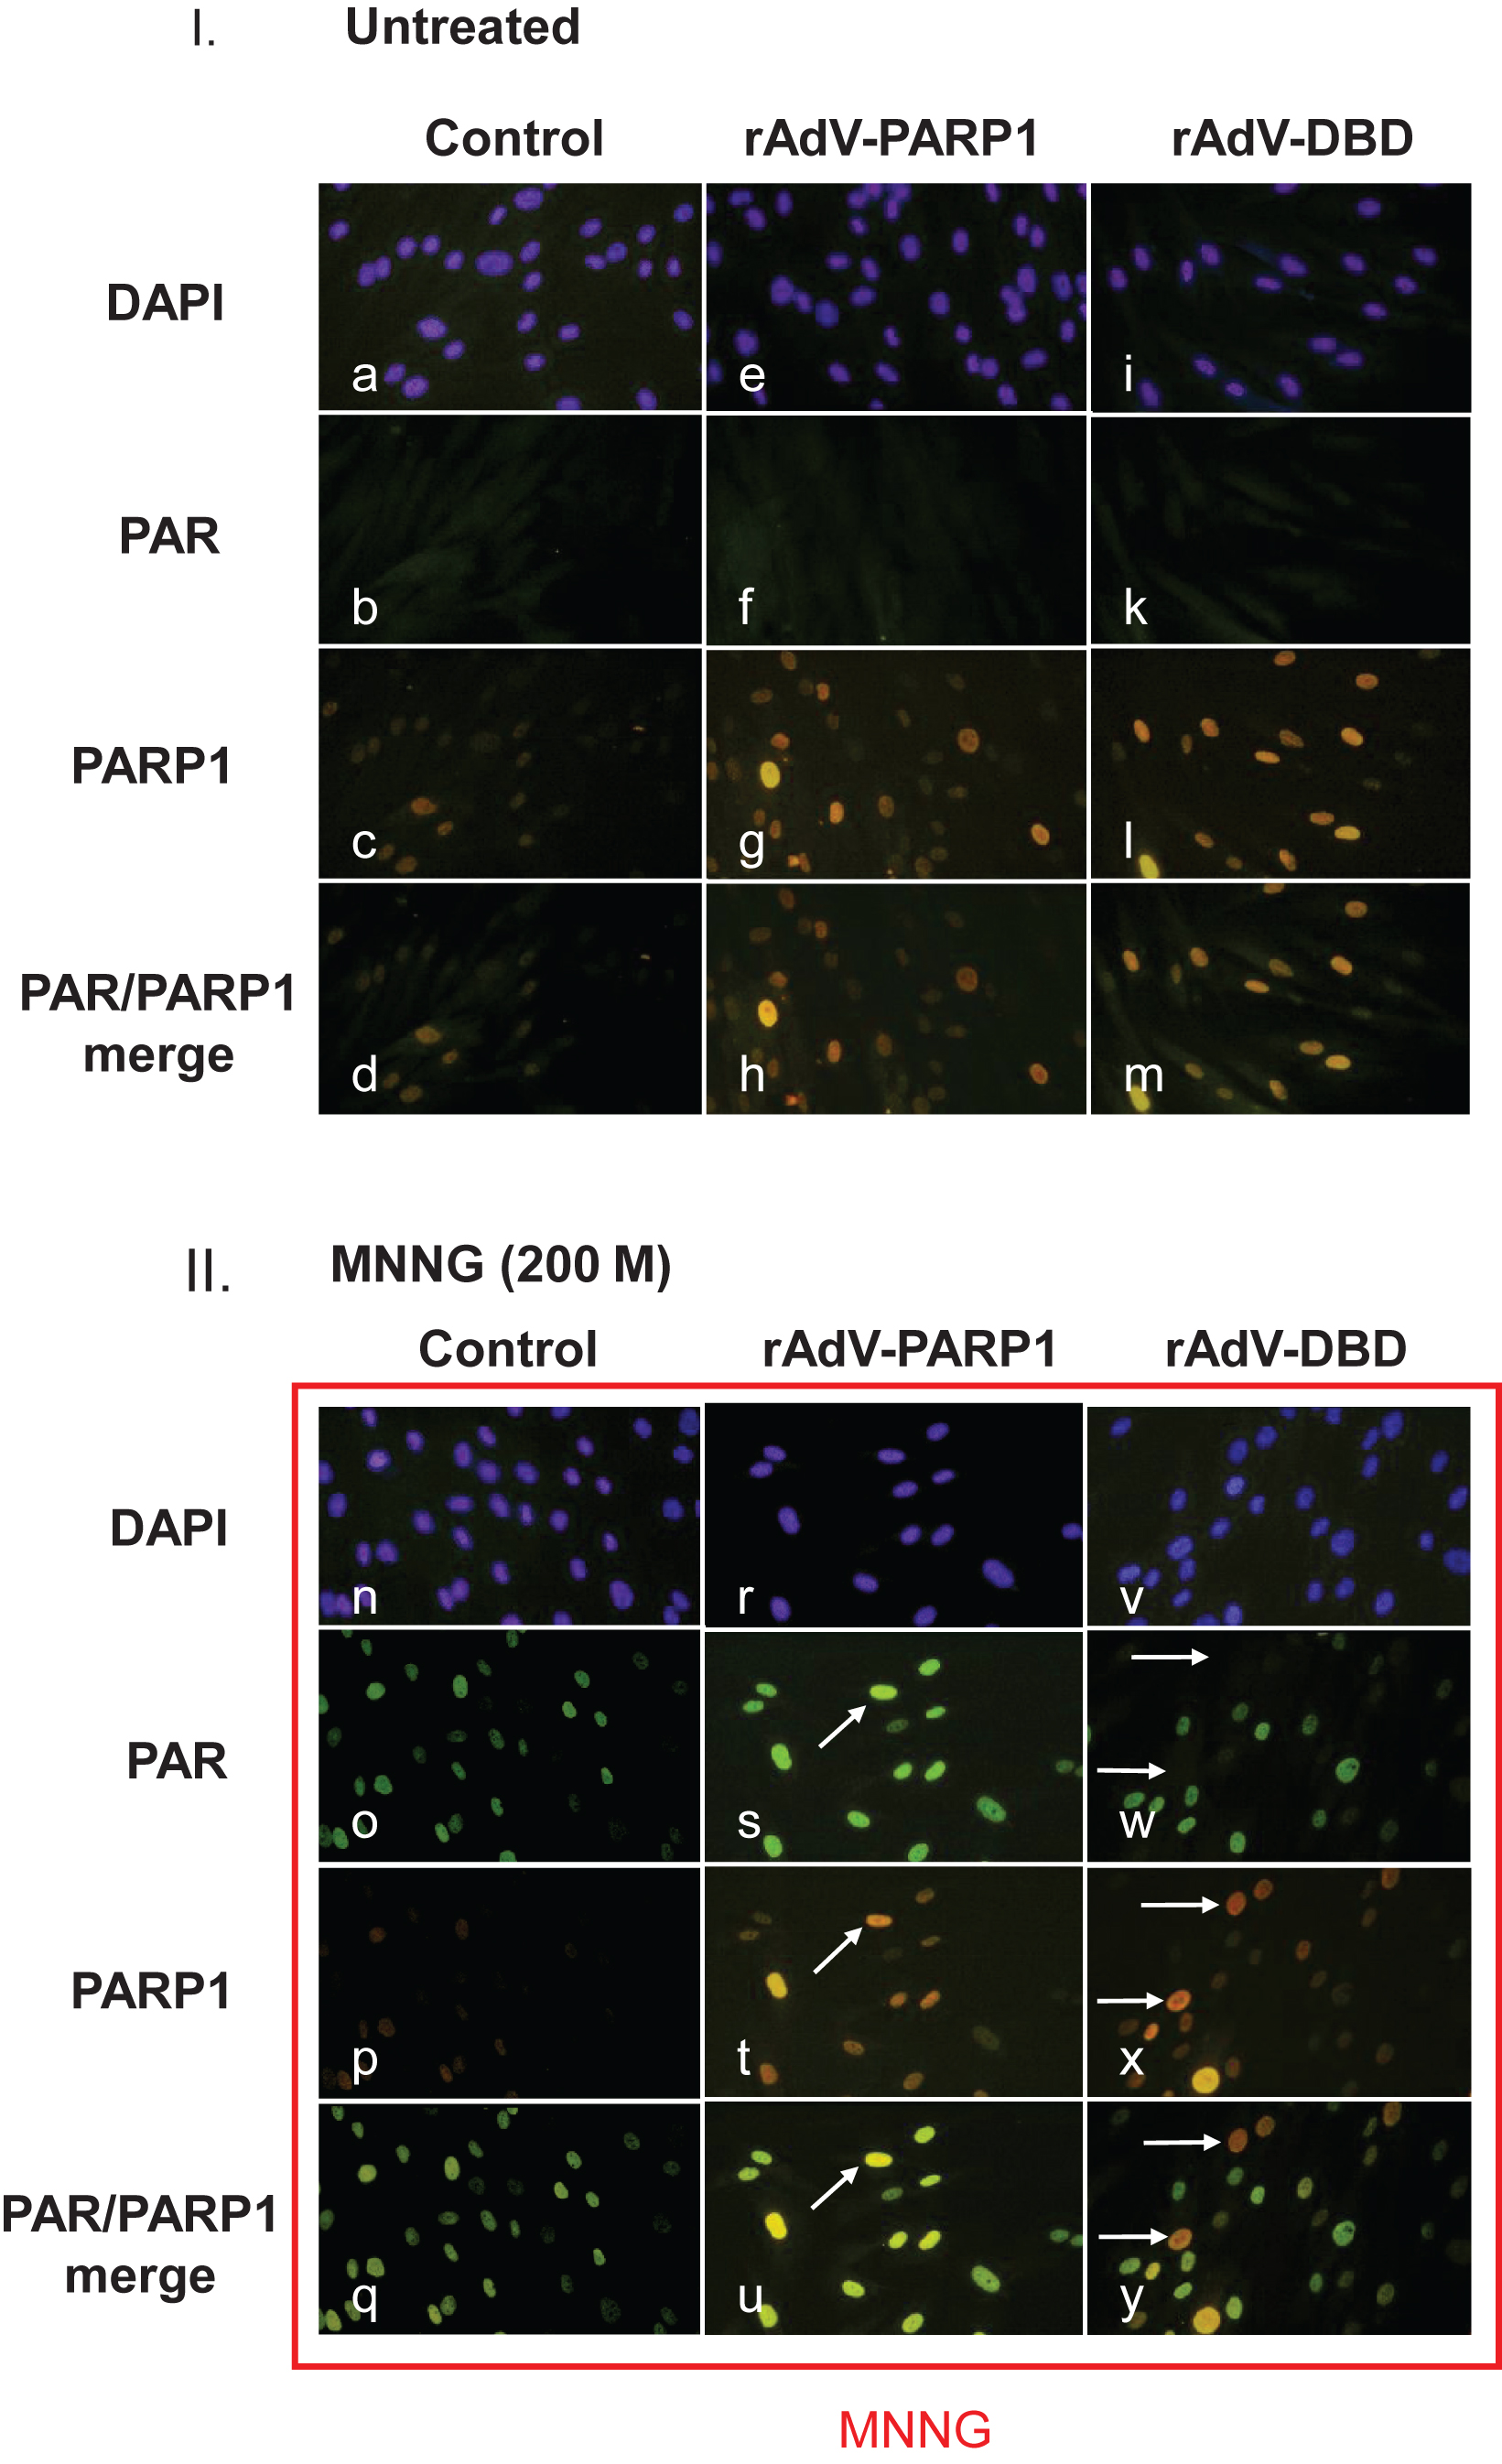 Poly(ADP-ribose) formation is altered in cells overexpressing PARP1 and PARP1 DBD. Normal human skin fibroblasts were transduced with rAdV-DBD and rAdV-PARP (MOI = 25 each). Twenty-four hours after transduction, cells were treated with 200μM MNNG for 20 min. Cells were washed with PBS, fixed with 4% formaldehyde and immunofluorescence staining was performed using a monoclonal antibody (10H) to detect poly(ADP-ribose) (PAR) and a polyclonal rabbit antiserum to detect PARP1. Secondary antibodies used were goat anti-mouse (fluorescein coupled (FITC, green) and goat anti-rabbit (rhodamine-coupled (TRITC, red). DNA was counterstained with DAPI. I. Fibroblast transduced with either rAdV-PARP or rAdV-DBD showed stronger nuclear PARP1 signals (g and l, respectively) than control cells (c). Without exogenously induced DNA damage, no increased PAR formation could be observed in control cells and in PARP1 and PARP1 DBD overexpressing cells (c, f, k). II. After MNNG induced DNA damage, control cells showed strong nuclear poly(ADP-ribose) signals (o). The PARP1 signal in these cells are very strong (p). Therefore the merge of PAR signals and PARP1 signals shows a green nuclear color (q). In cells overexpressing PARP1, the PAR signals (s) were stronger in cells which also showed a stronger PARP1 specific staining (compare arrows in s and t), indicating that a high expression level due to the transduction leads to an increase in PAR formation. In the merged image, these cells appear yellowish, while cells with lower PARP1 expression levels appear greenish (u). In cells which overexpressed the dominant negative DBD of PARP1, cells with strong PARP1 DBD signals (arrows in x) lacked PAR signals (arrows in w). In the merged image (y), these cells therefore appeared red (arrows), while cells without strong DBD signals appeared greenish due to the ADP-ribose polymer signals.